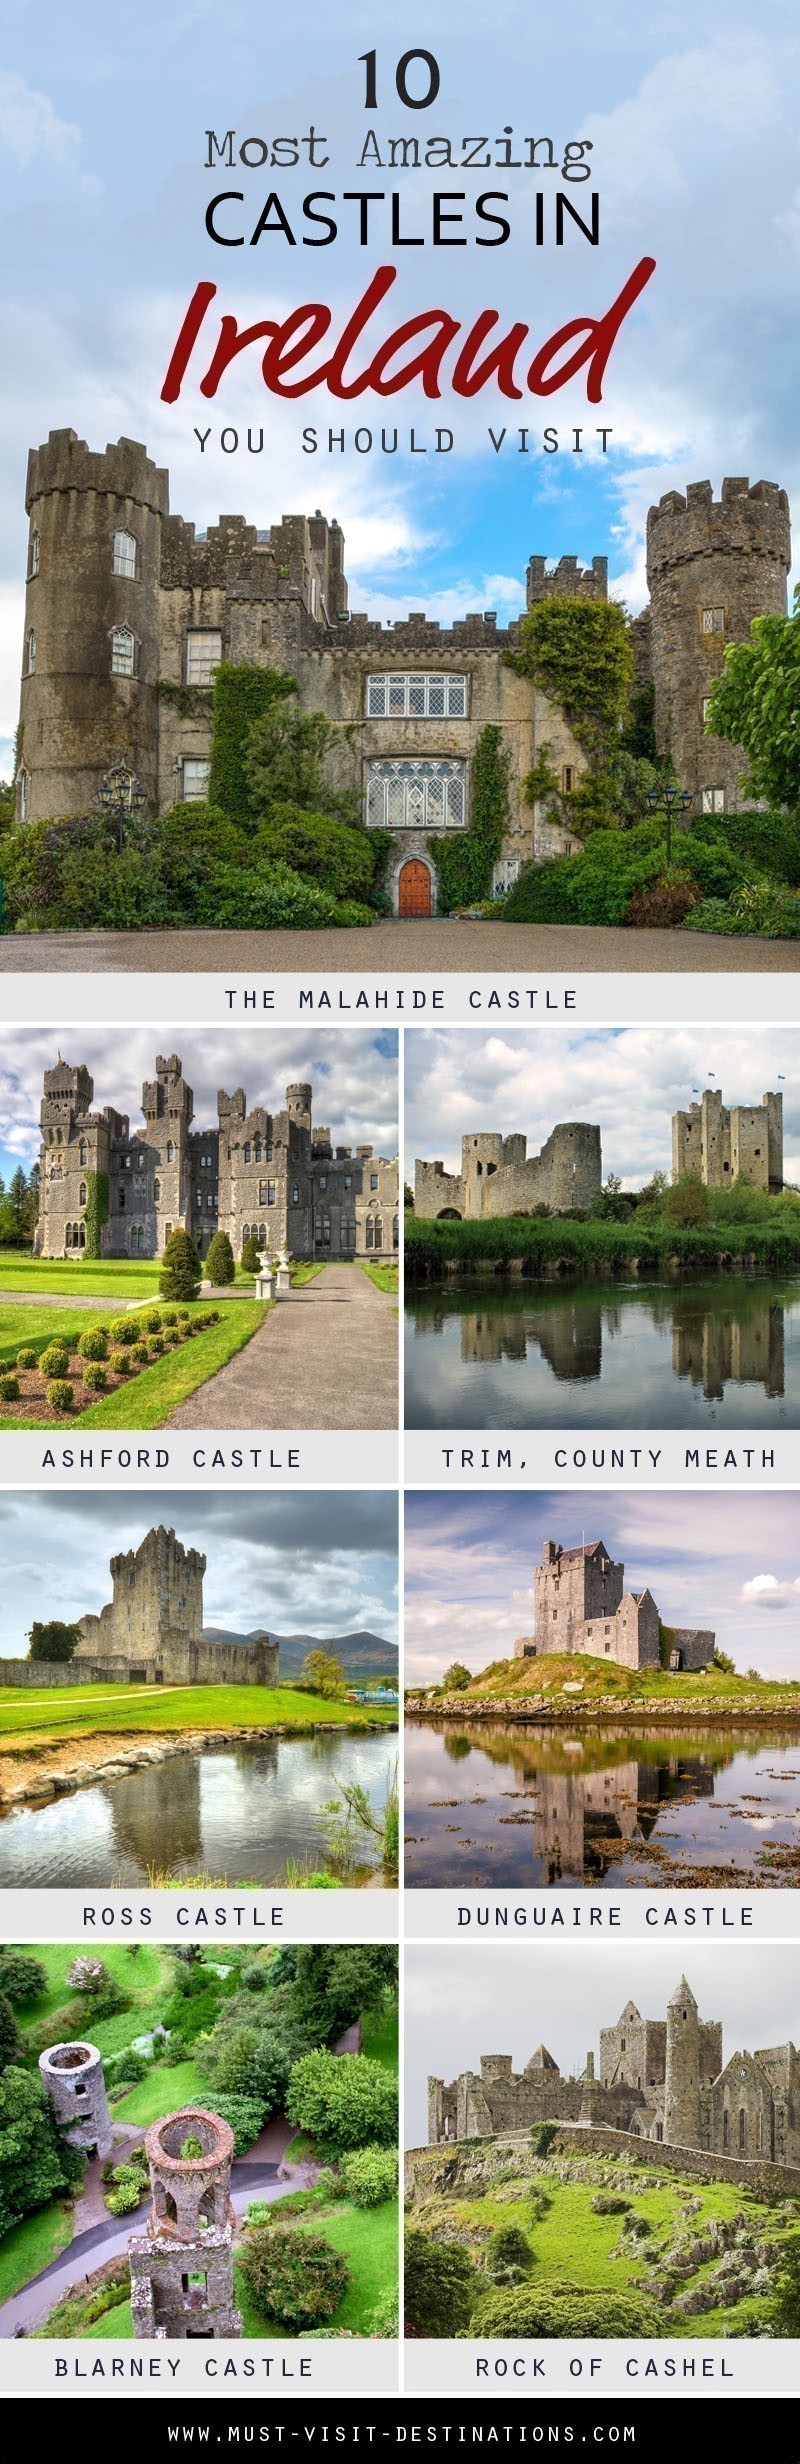 Ireland is home to some of the most beautiful medieval castles in the world. Discover 10 Most Amazing Castles in Ireland You Should Visit!